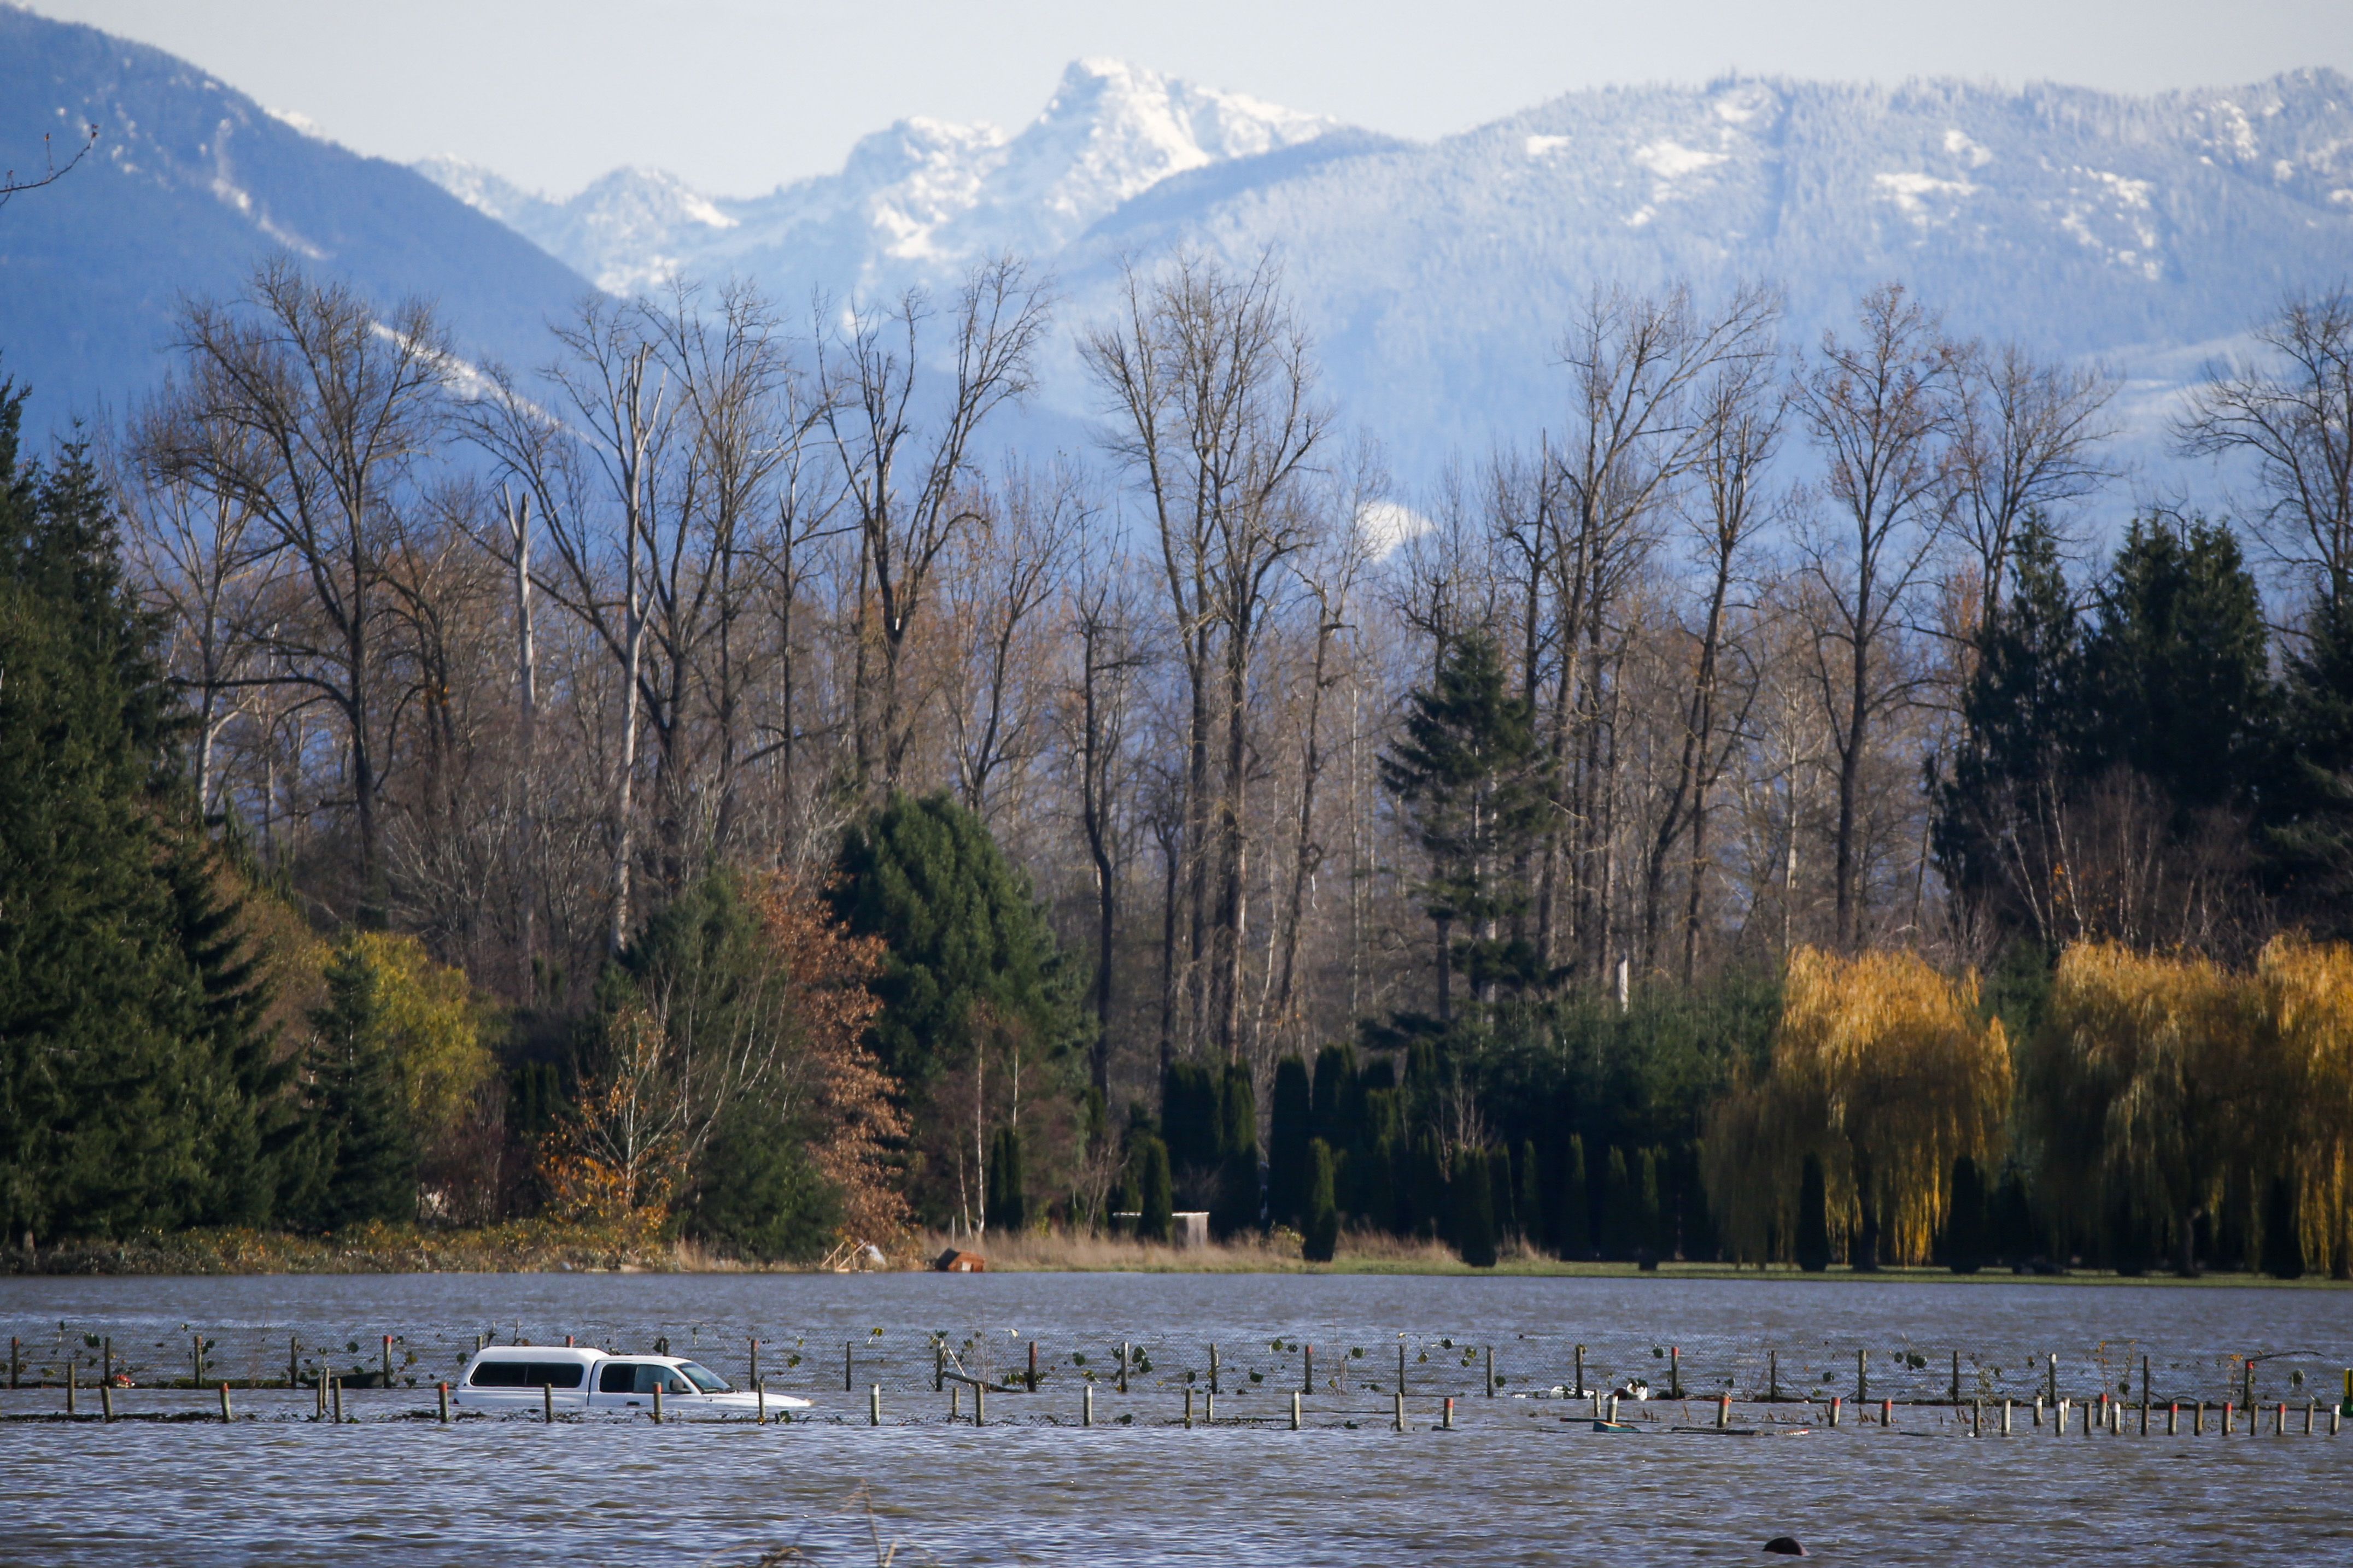  A car is seen partially submerged as floodwaters from the Skagit River inundate farmland outside of Burlington, Washington, on November 17